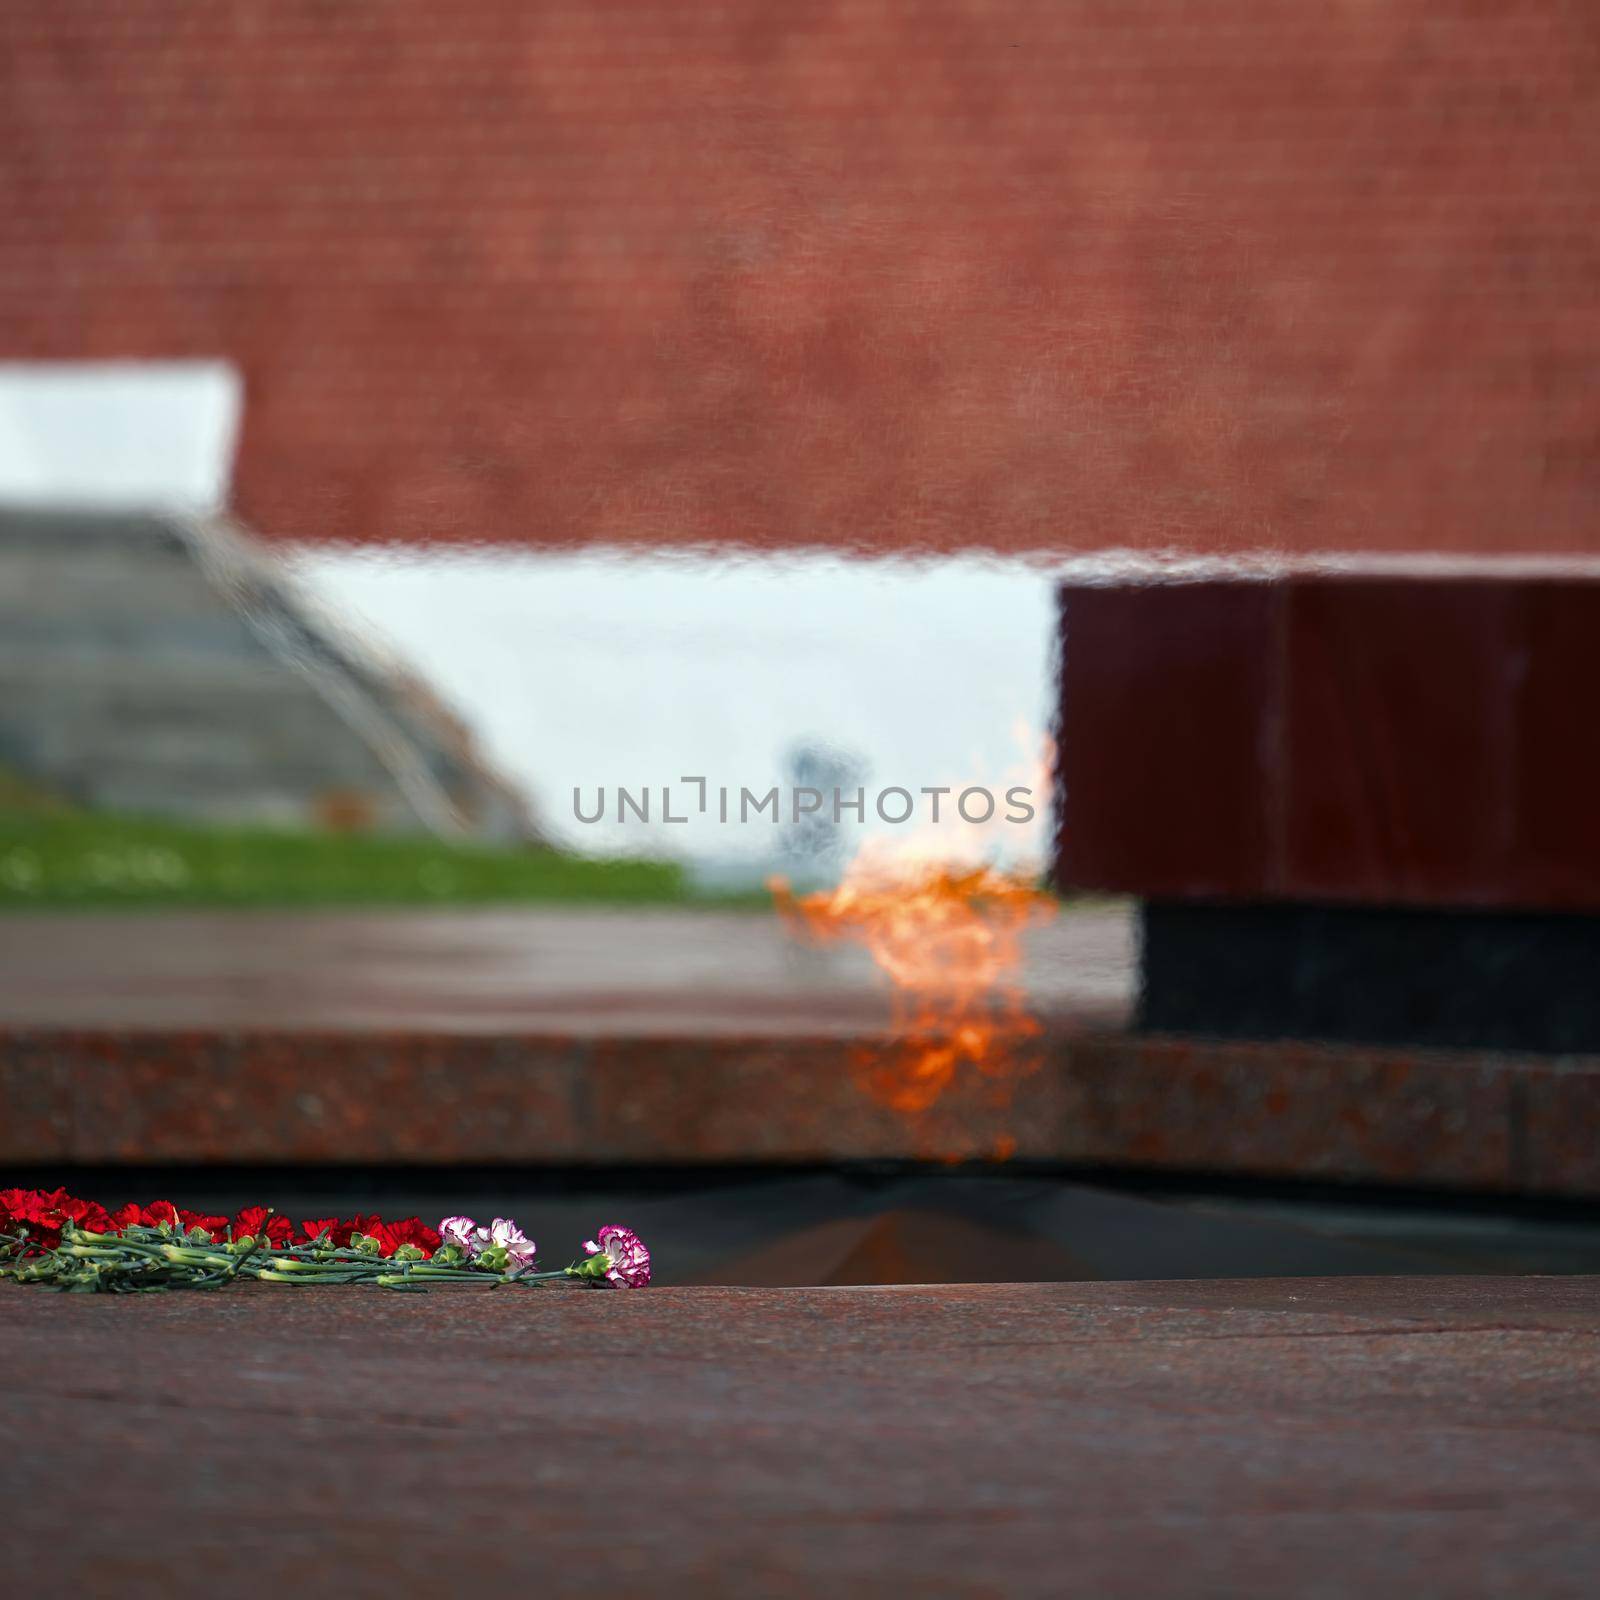 Flowers by the Eternal Flame. Eternal Flame in the Kremlin. Guard of Honor at the tomb of the Unknown Soldier at the wall of Moscow Kremlin. 11.05.2022 Moscow, Russia.